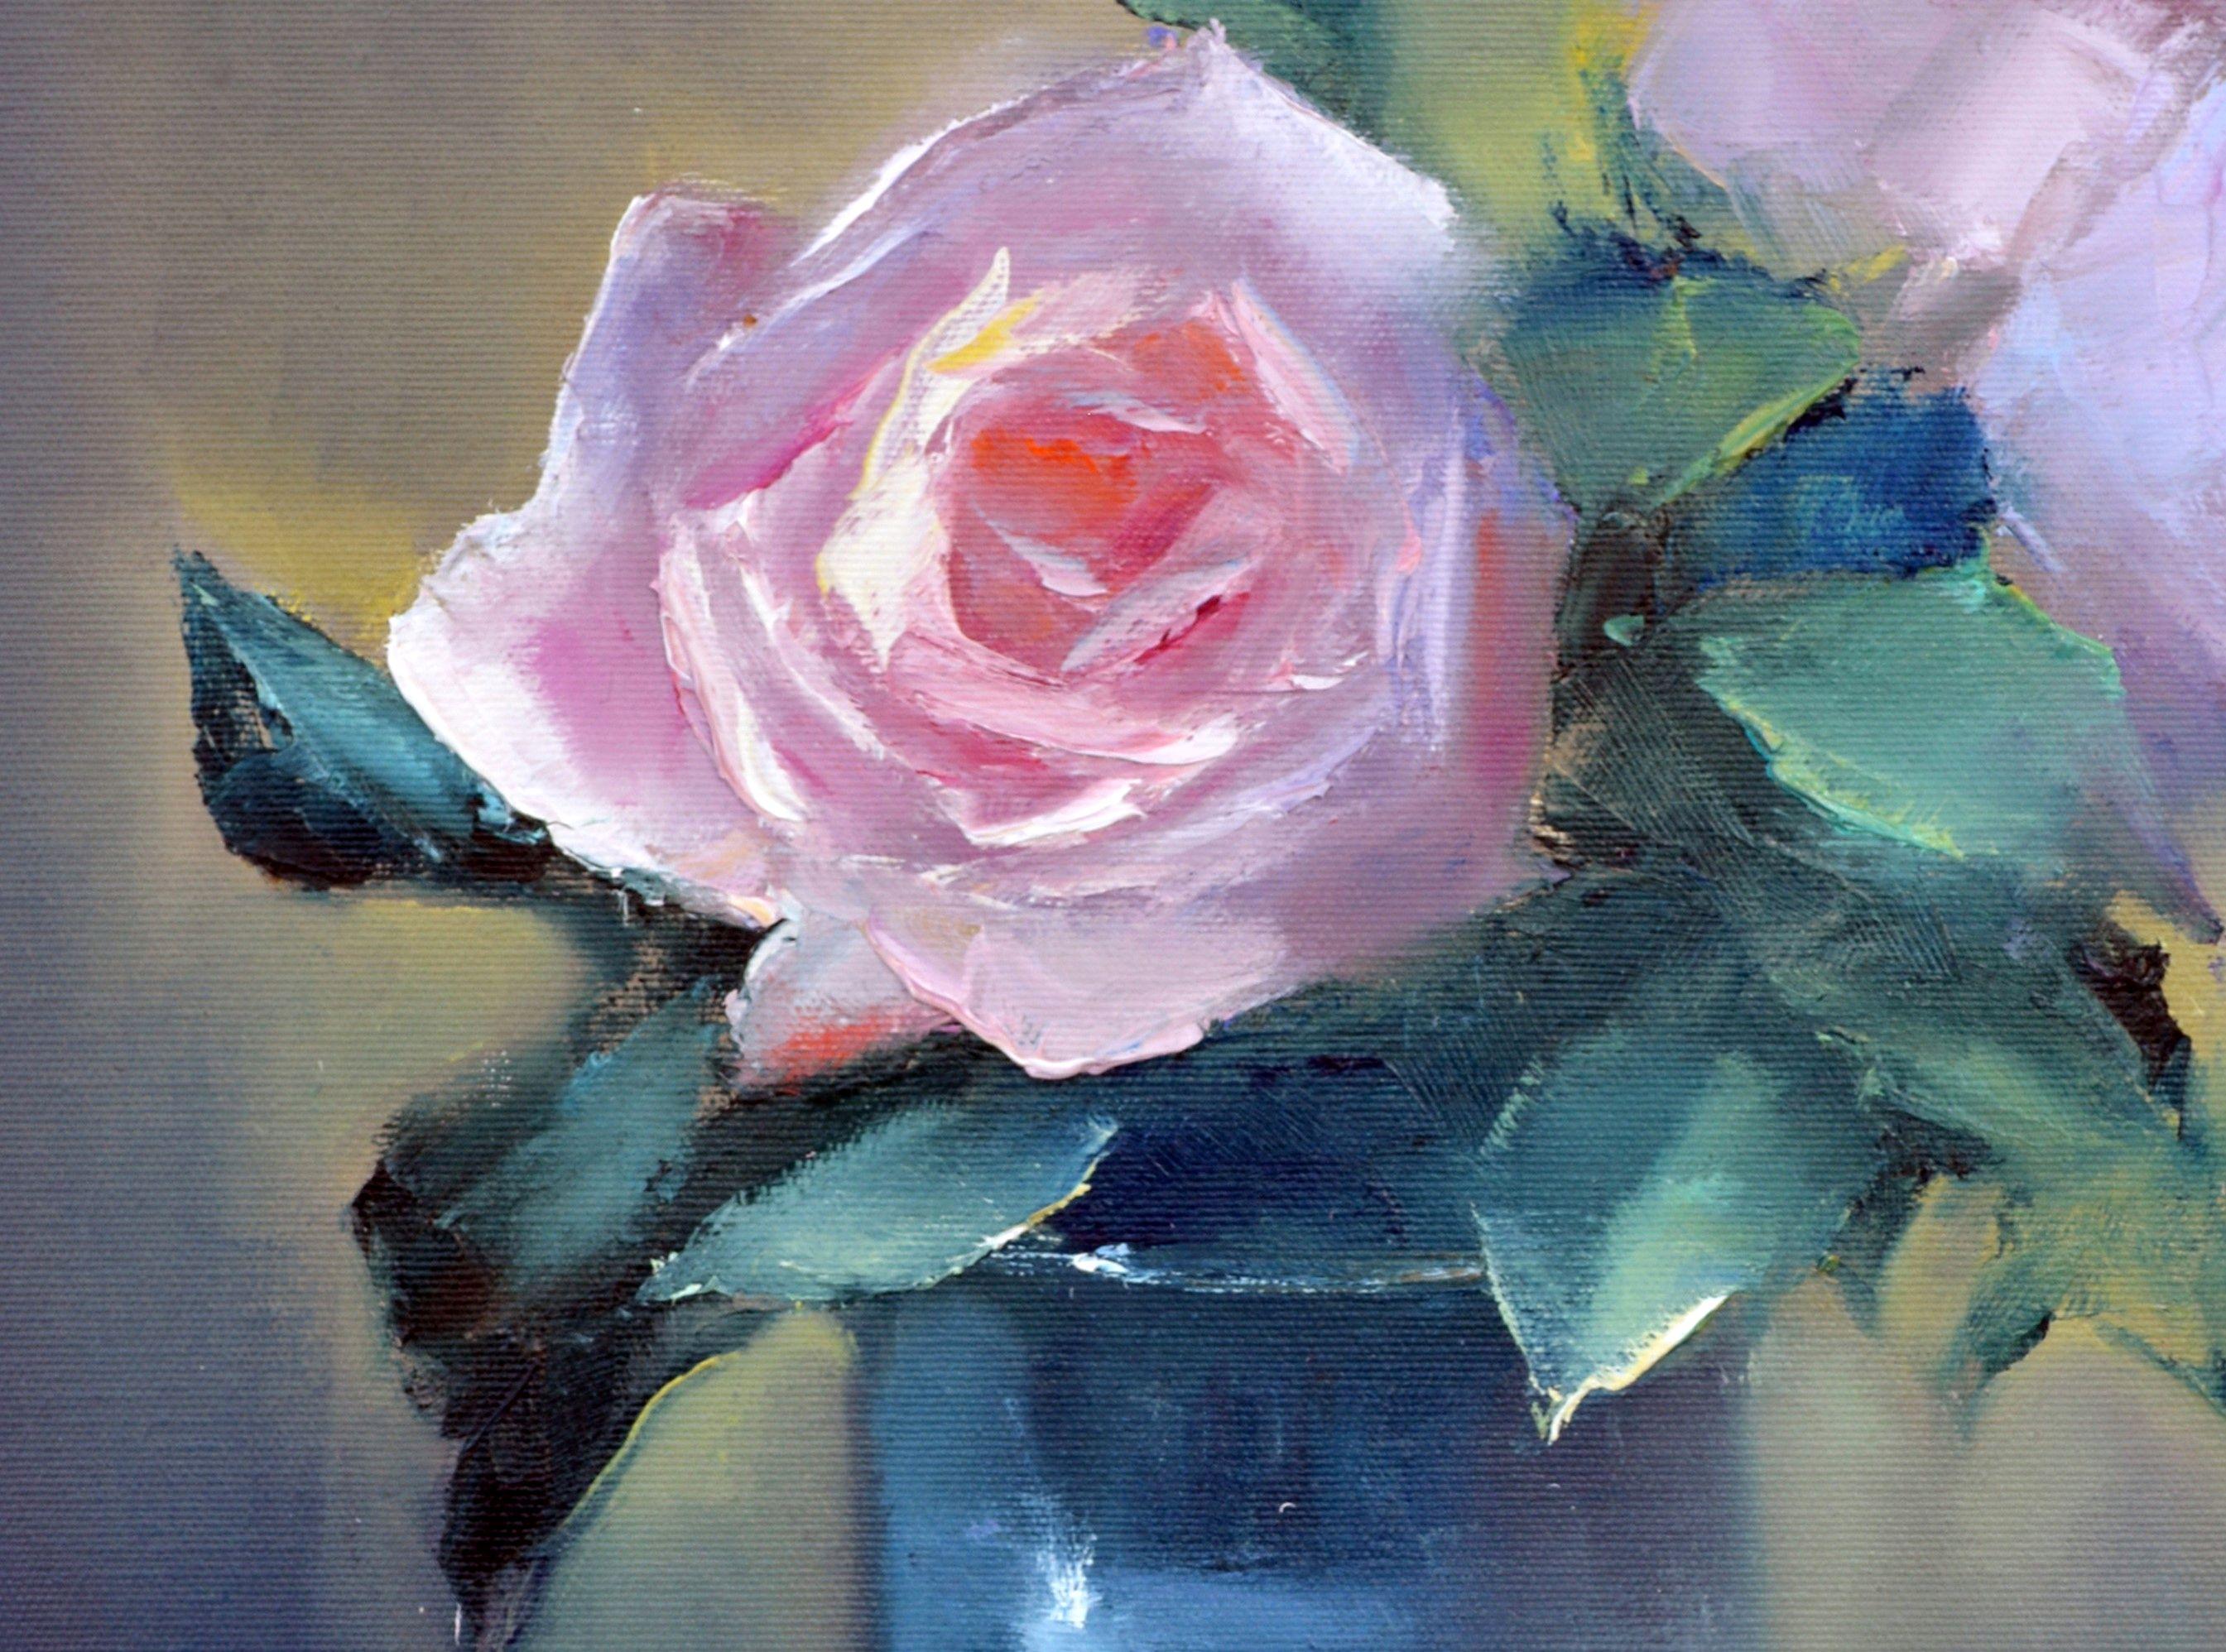 In this oil painting, I sought to capture the delicate dance of light and shadow, blending expressionism with a touch of fine art realism. Each stroke is infused with emotion, as if the roses emanate a quiet resilience against the somber hues of